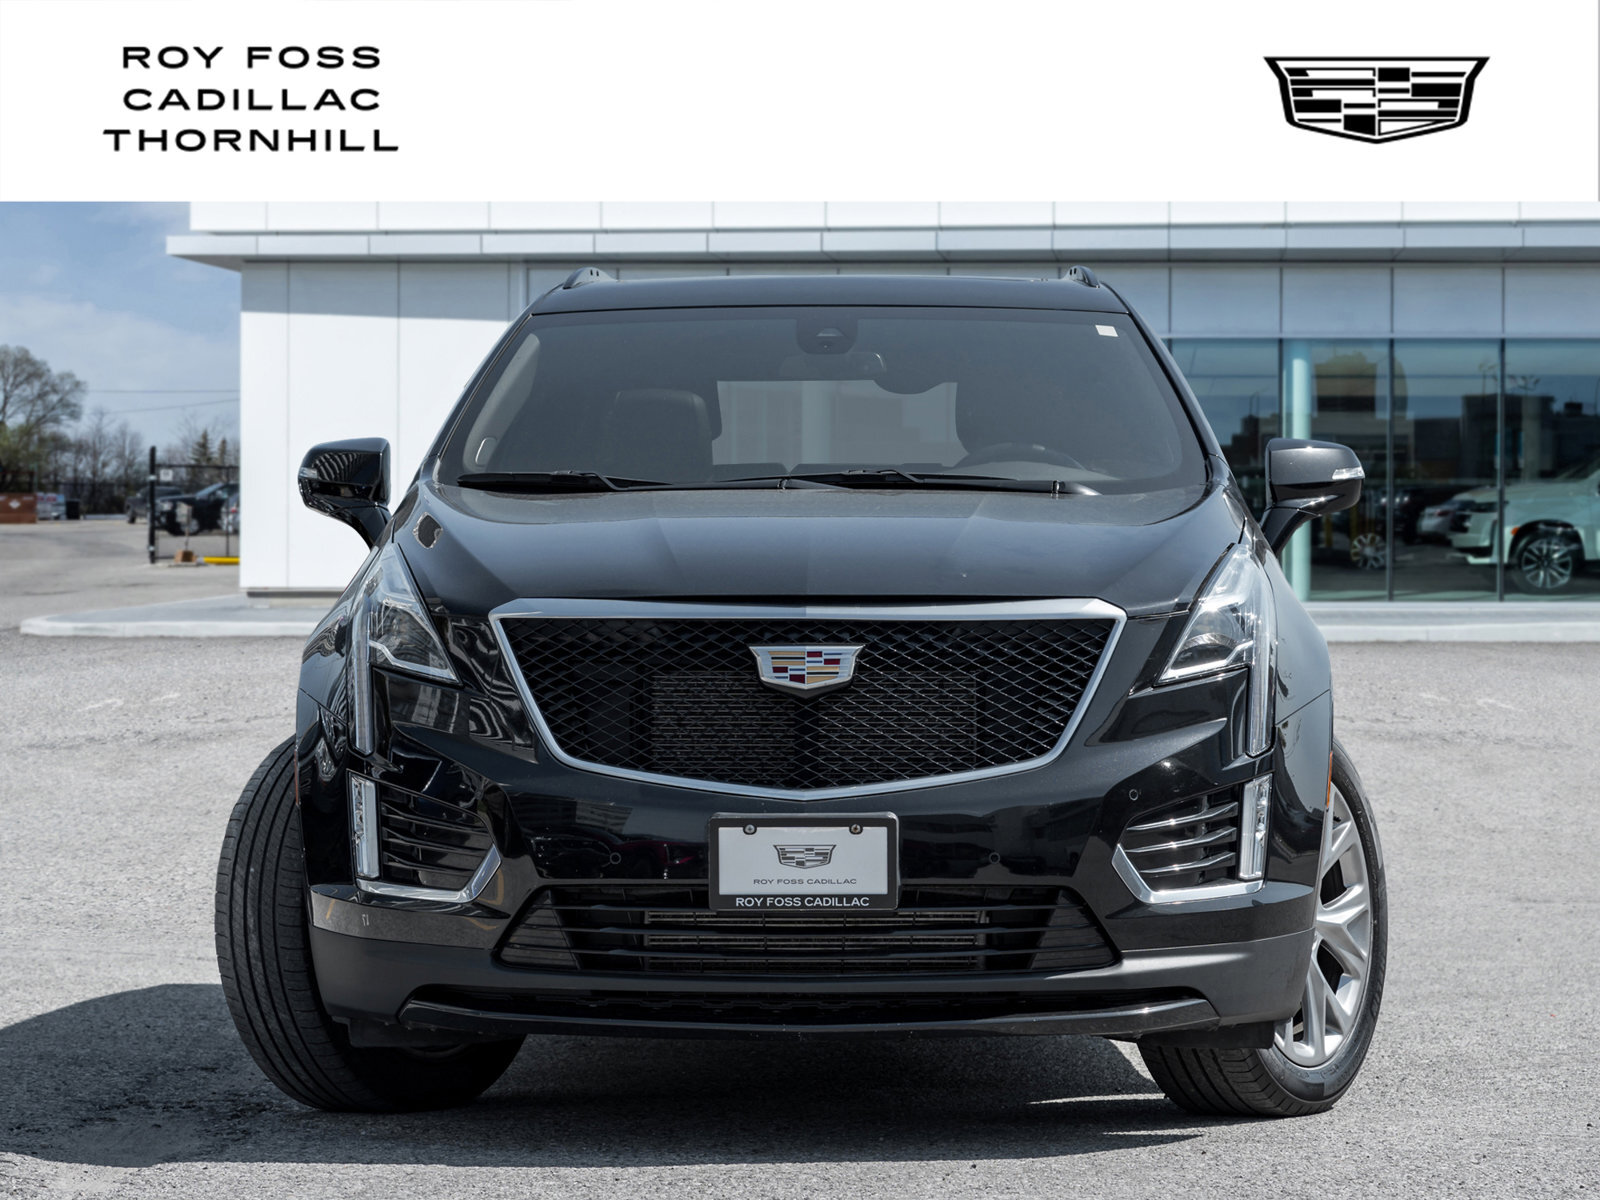 2020 Cadillac XT5 RATES STARTING FROM 4.99%+1 OWNER+LOW KM+CERTIFIED